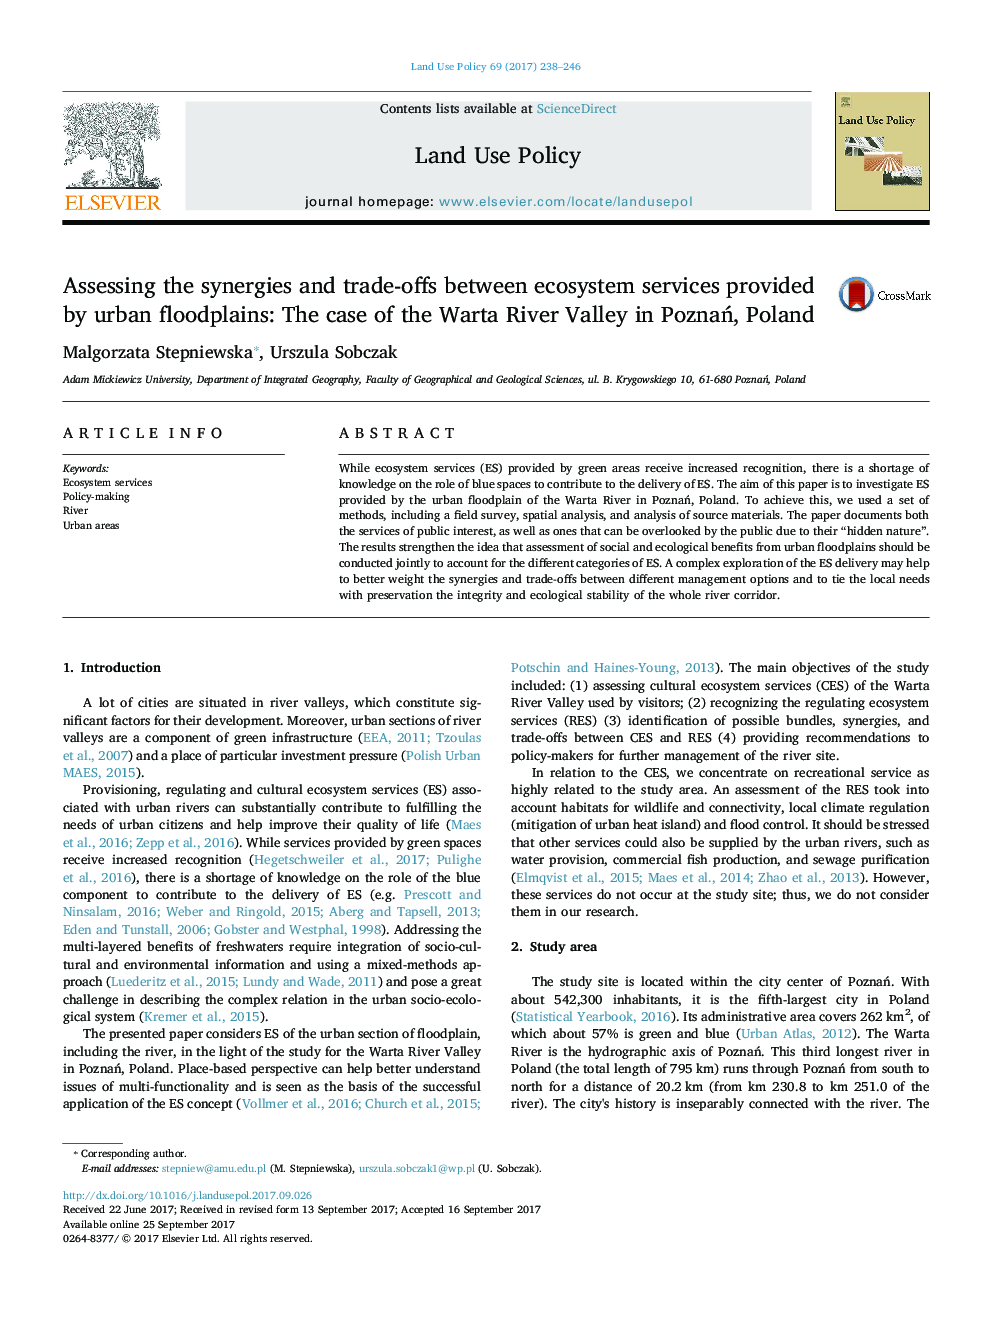 Assessing the synergies and trade-offs between ecosystem services provided by urban floodplains: The case of the Warta River Valley in PoznaÅ, Poland